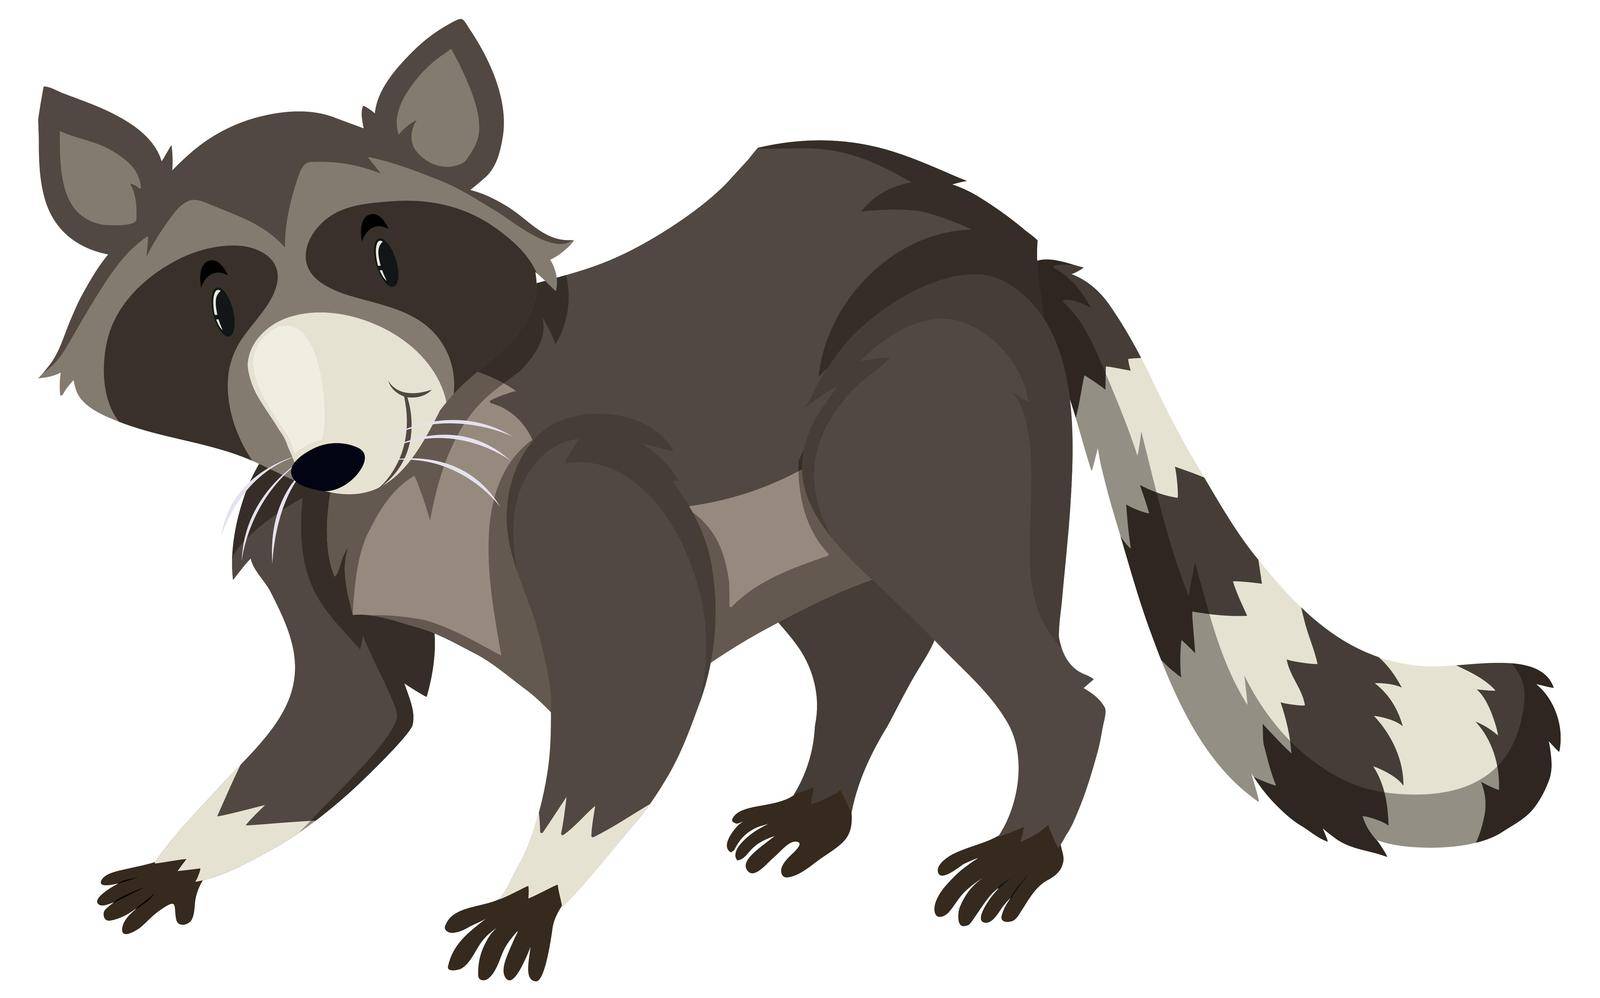 Raccoon with black and white fur illustration